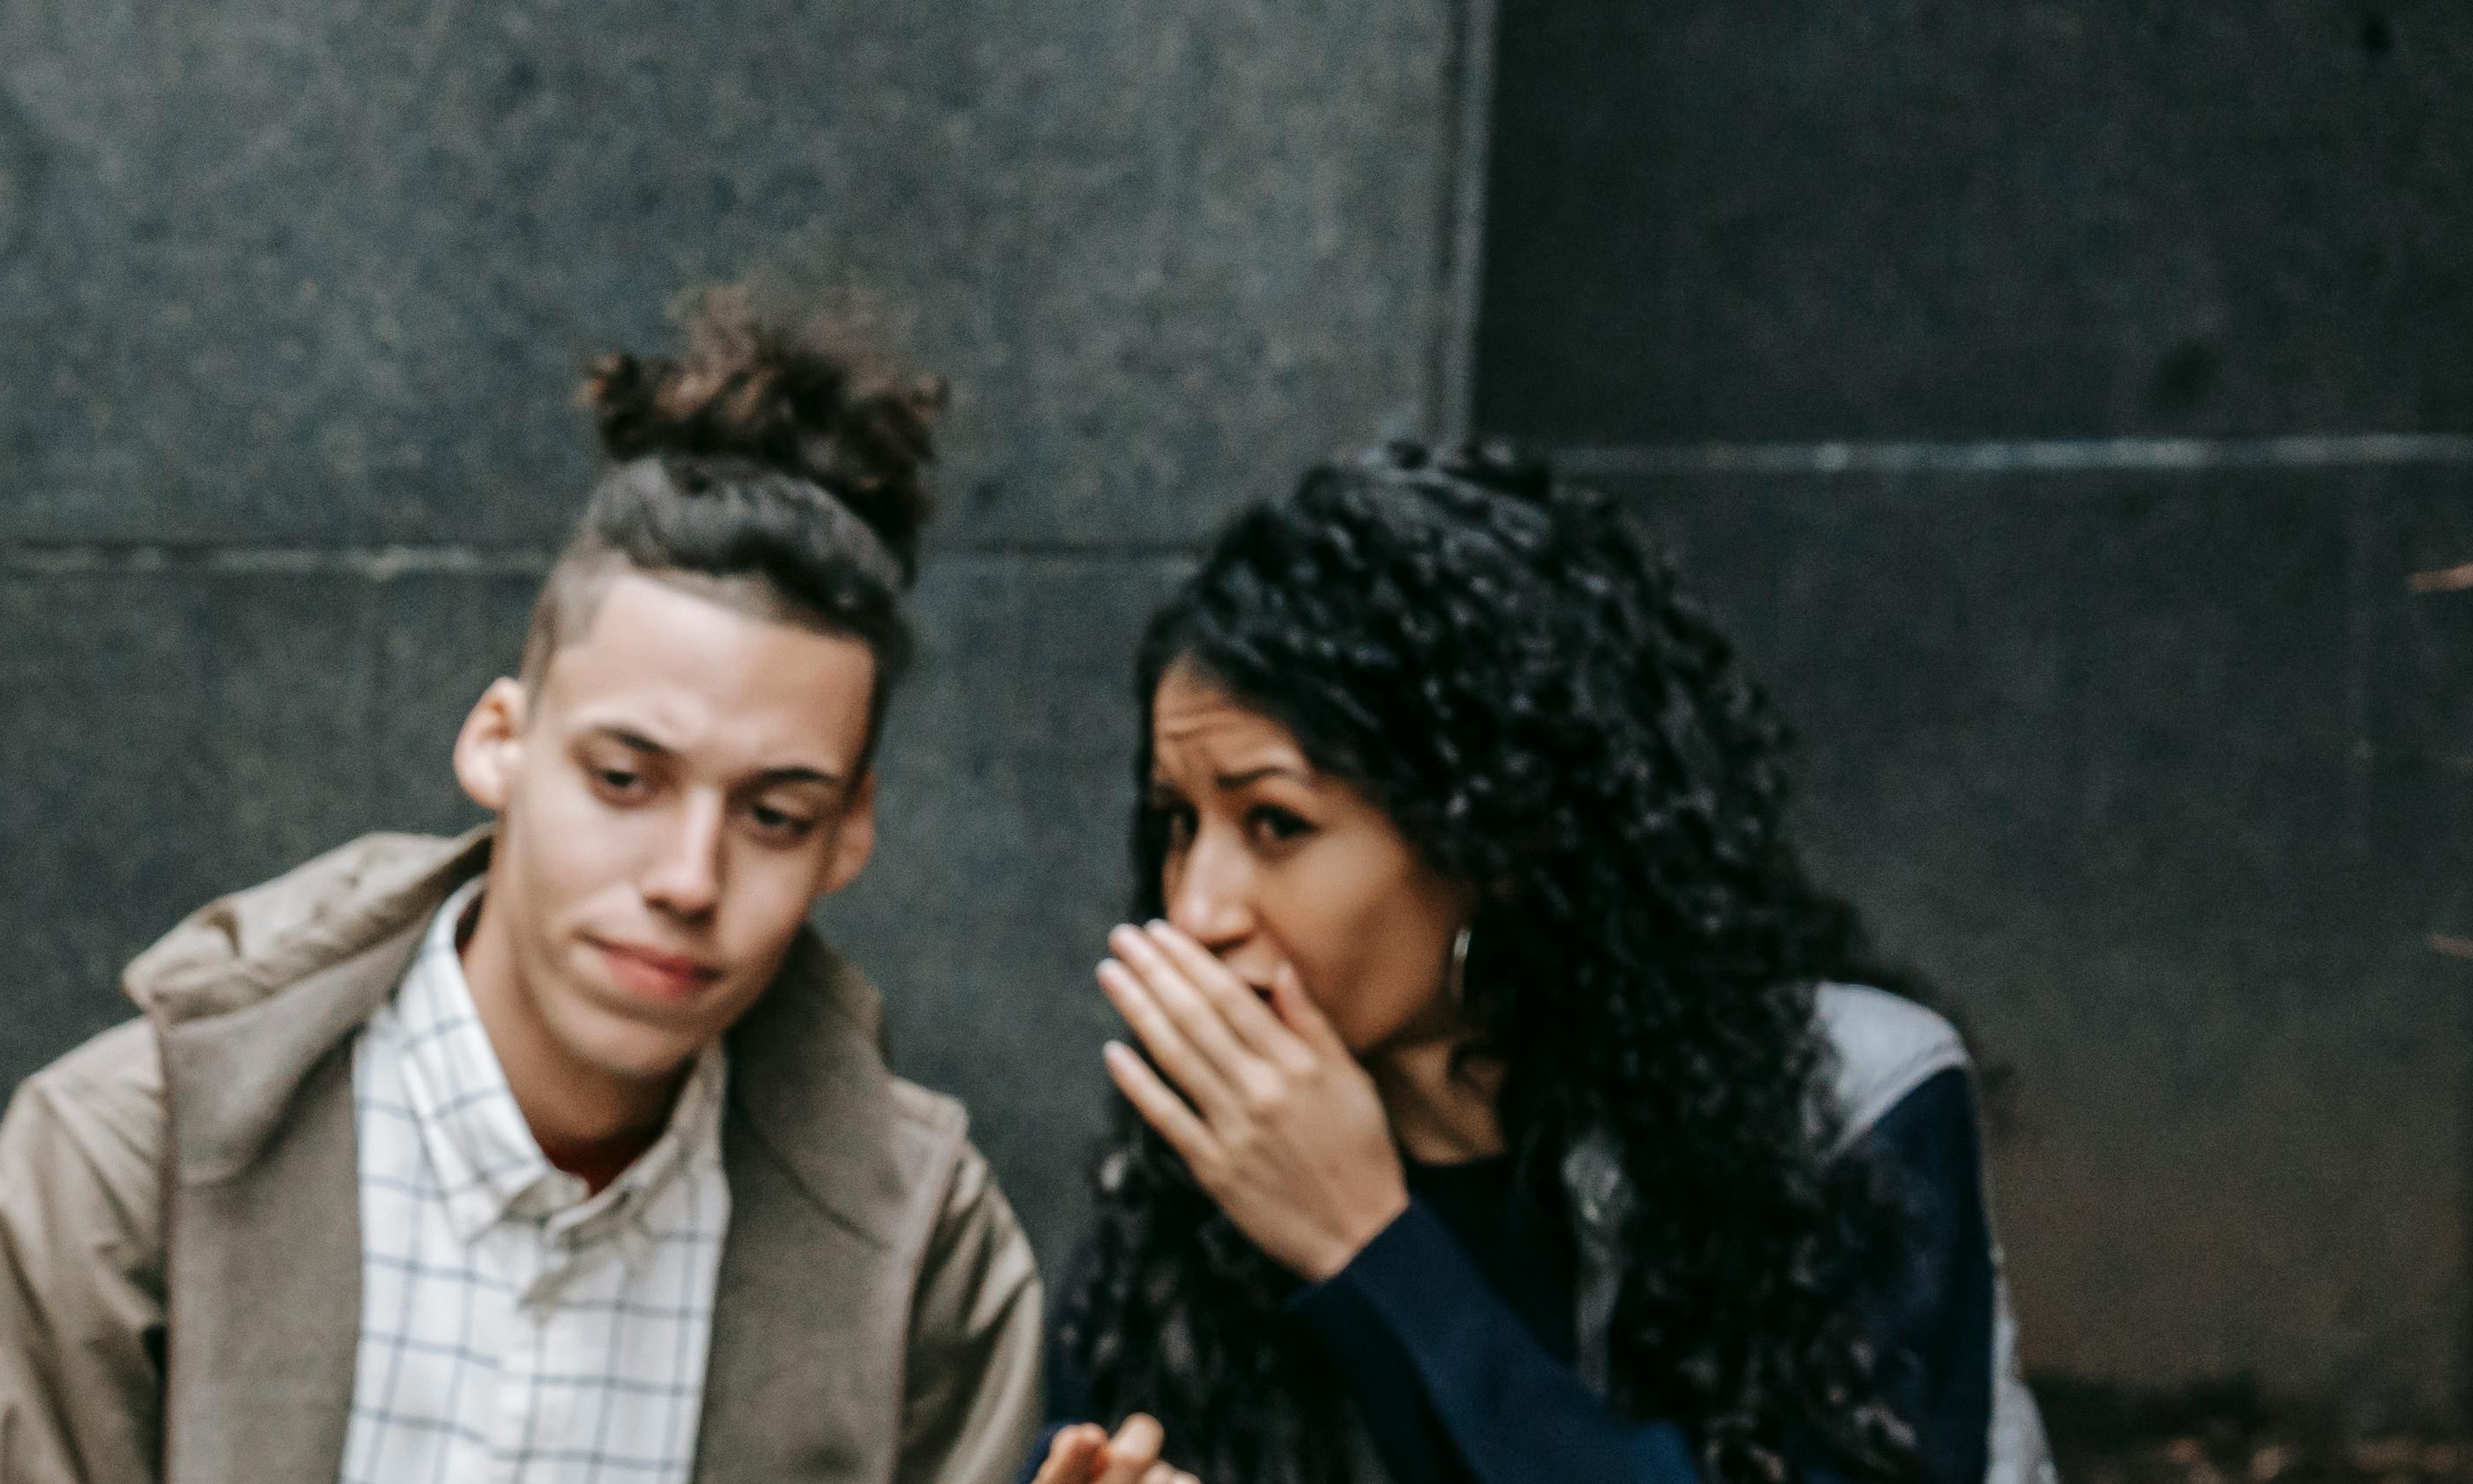 Neighbors gathering on the street, whispering and taking sides | Source: Pexels